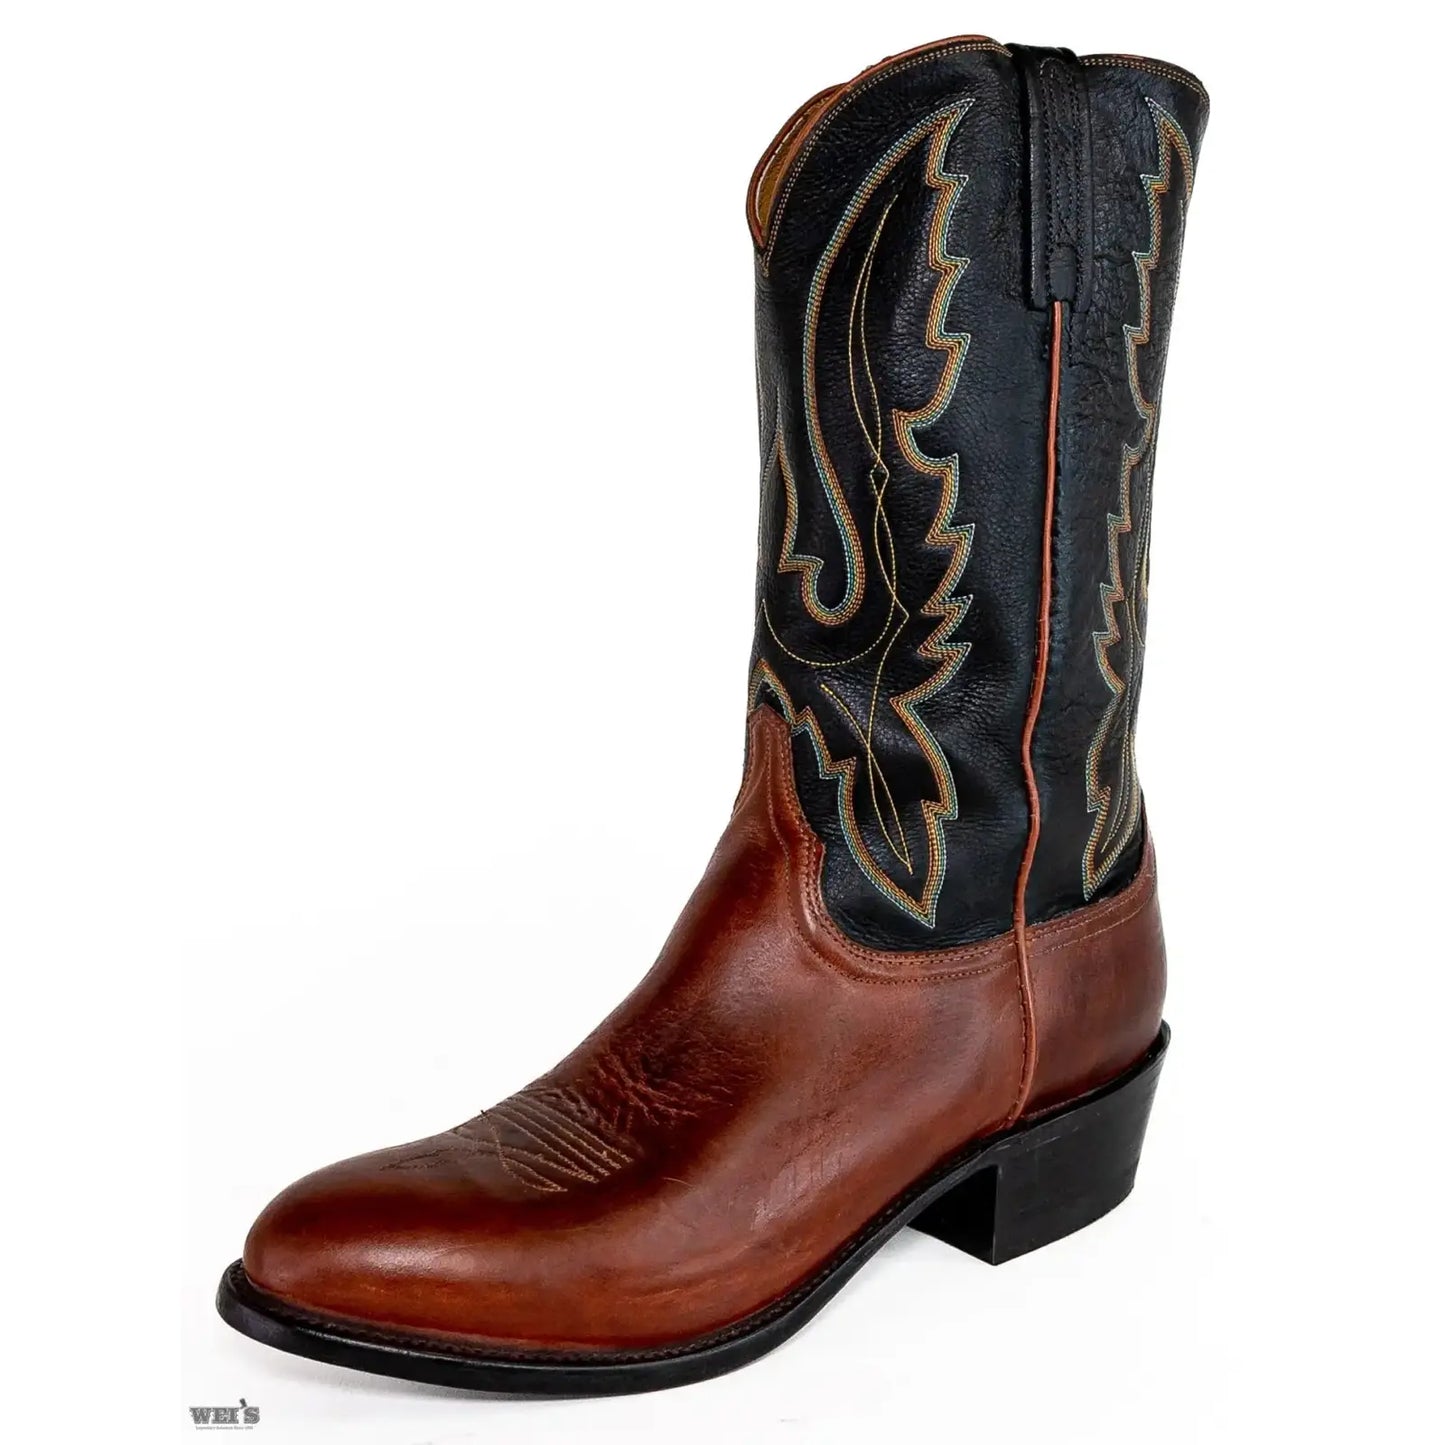 Lucchese 1883 Men's Cowboy Boots 13" Calfskin 2-Toned N1510 R4-EE